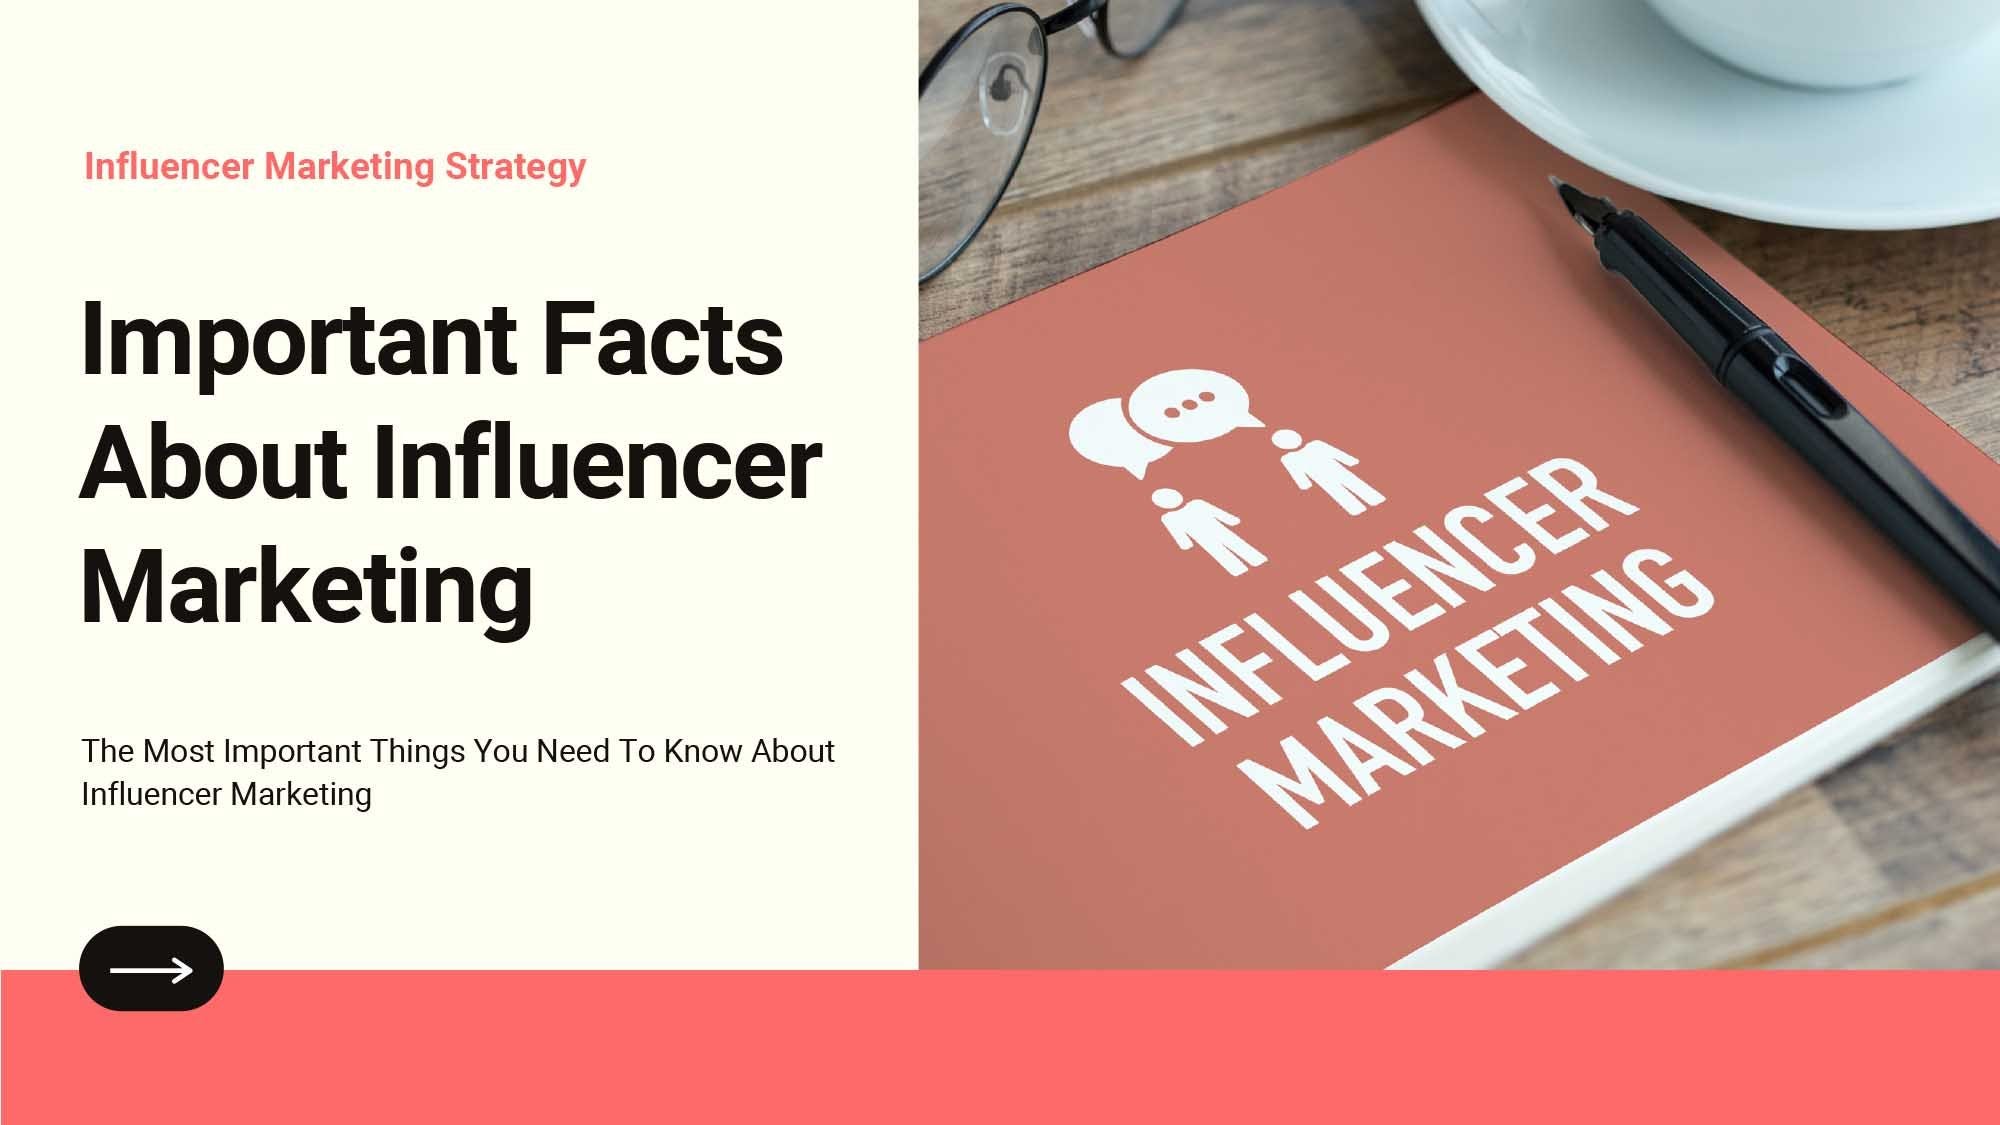 The Most Important Things You Need To Know About Influencer Marketing!